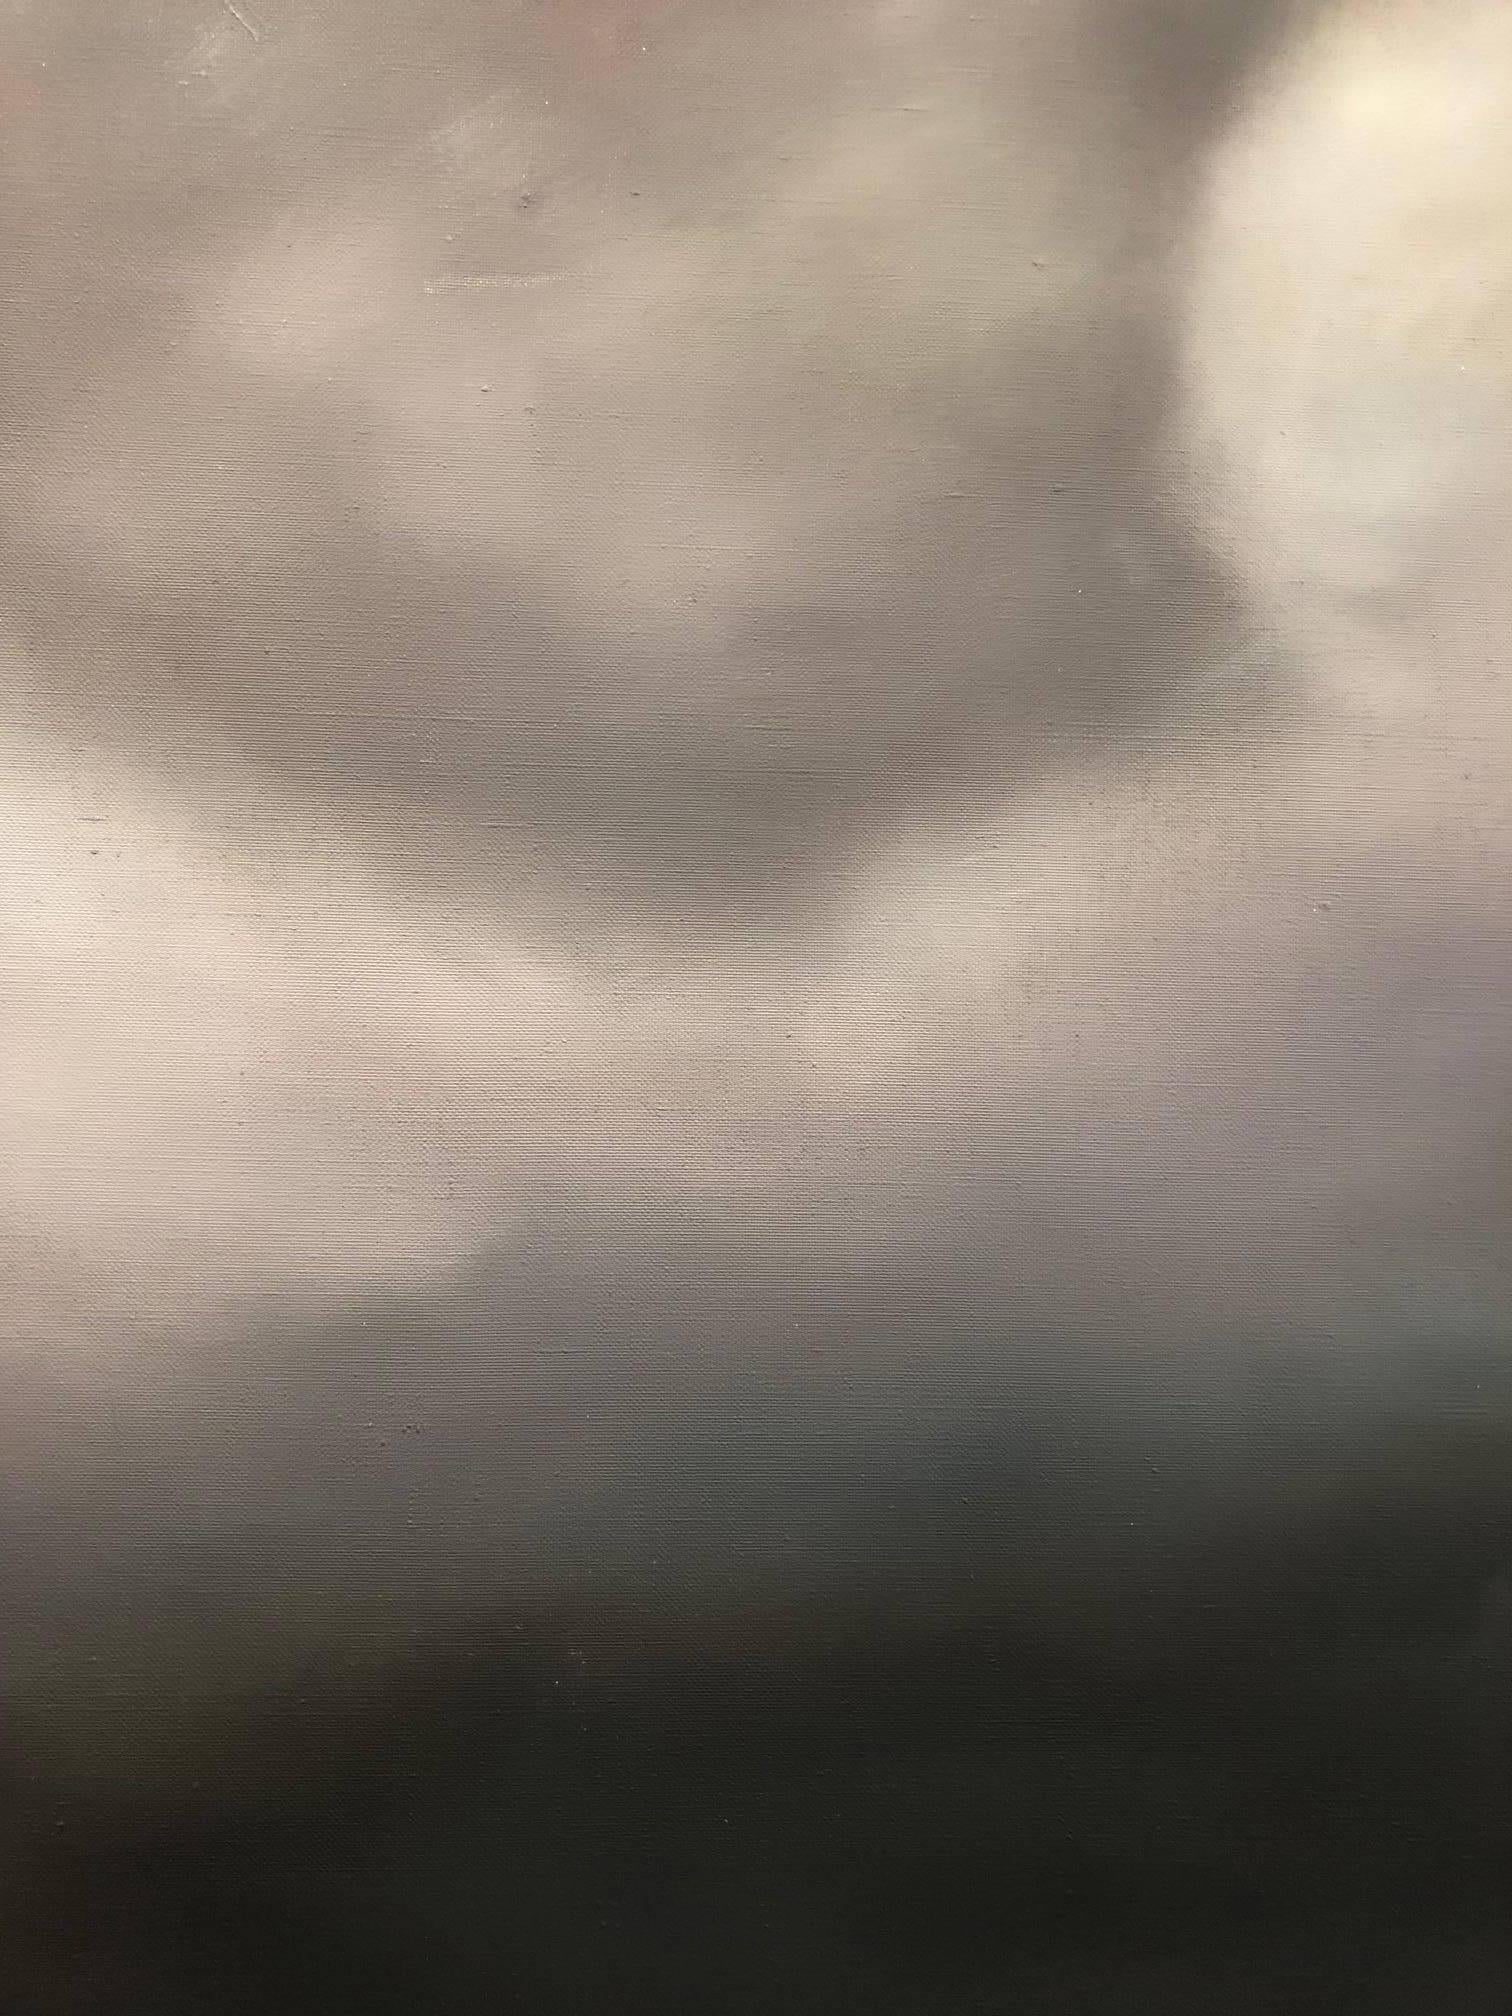 ELPIS / Hope - oil on linen, 84 x 60 inches - clouds, sea, water, grey, indigo - Contemporary Painting by Frédéric Choisel